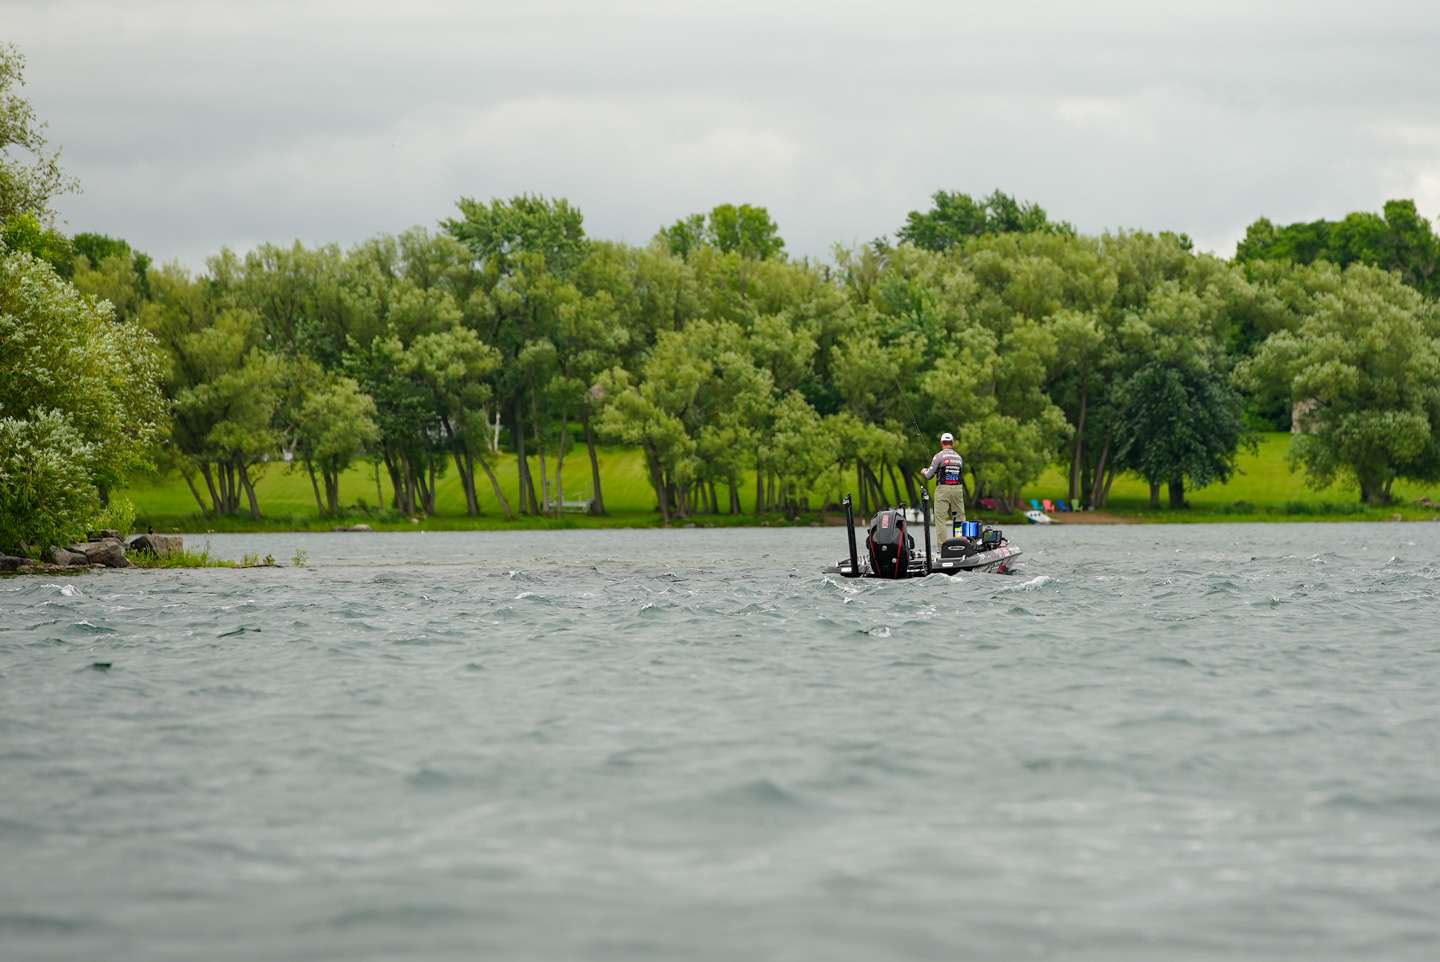 Follow along with Gerald Swindle as he gets back to the grind on the second day of the 2021 Farmers Insurance Bassmaster Elite at St. Lawrence River!